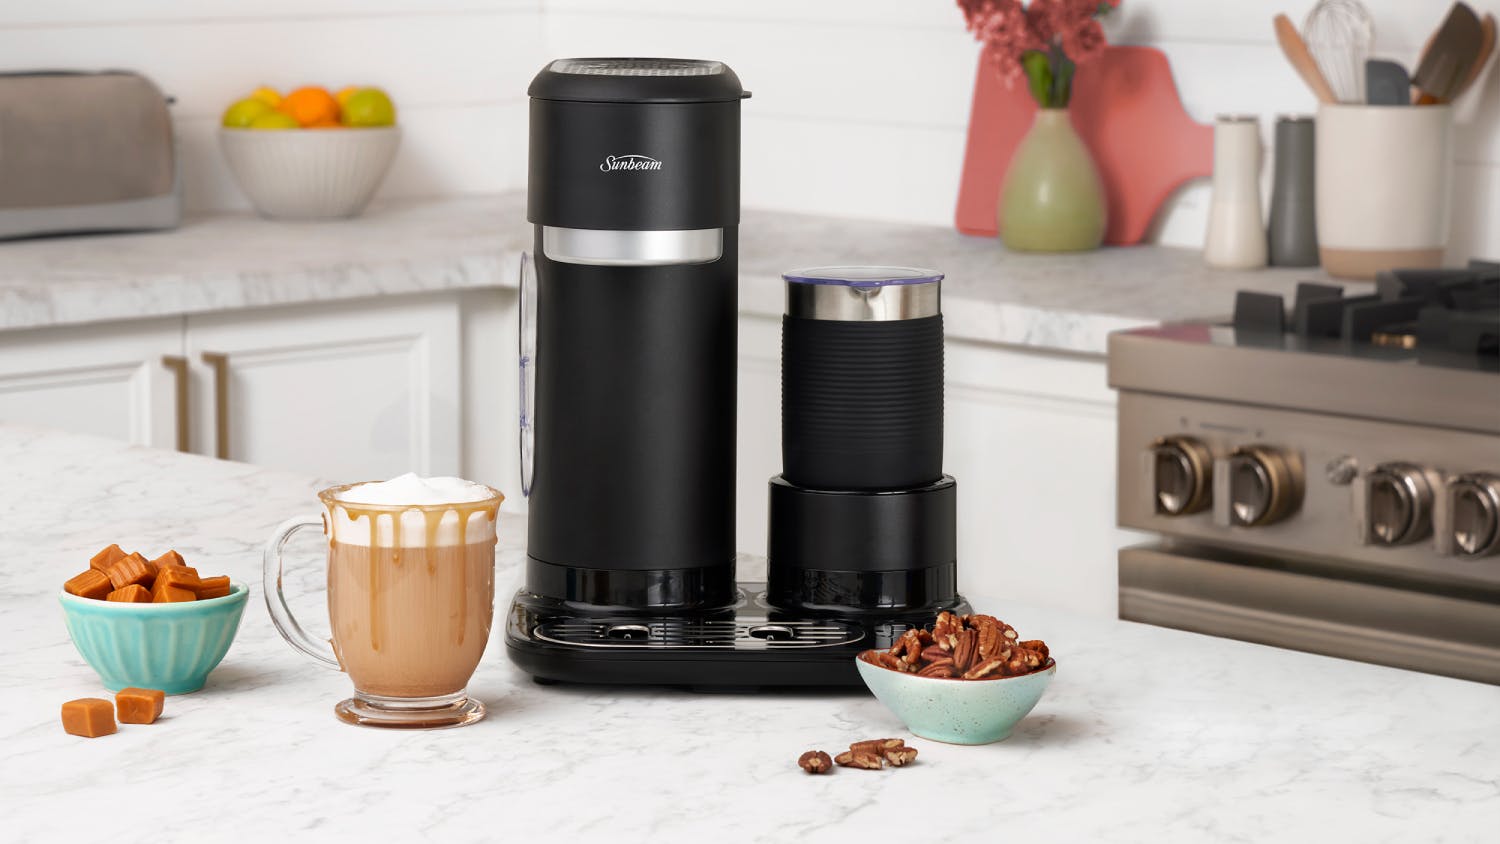 Sunbeam Iced & Hot Coffee Machine with Integrated Frother on Vimeo